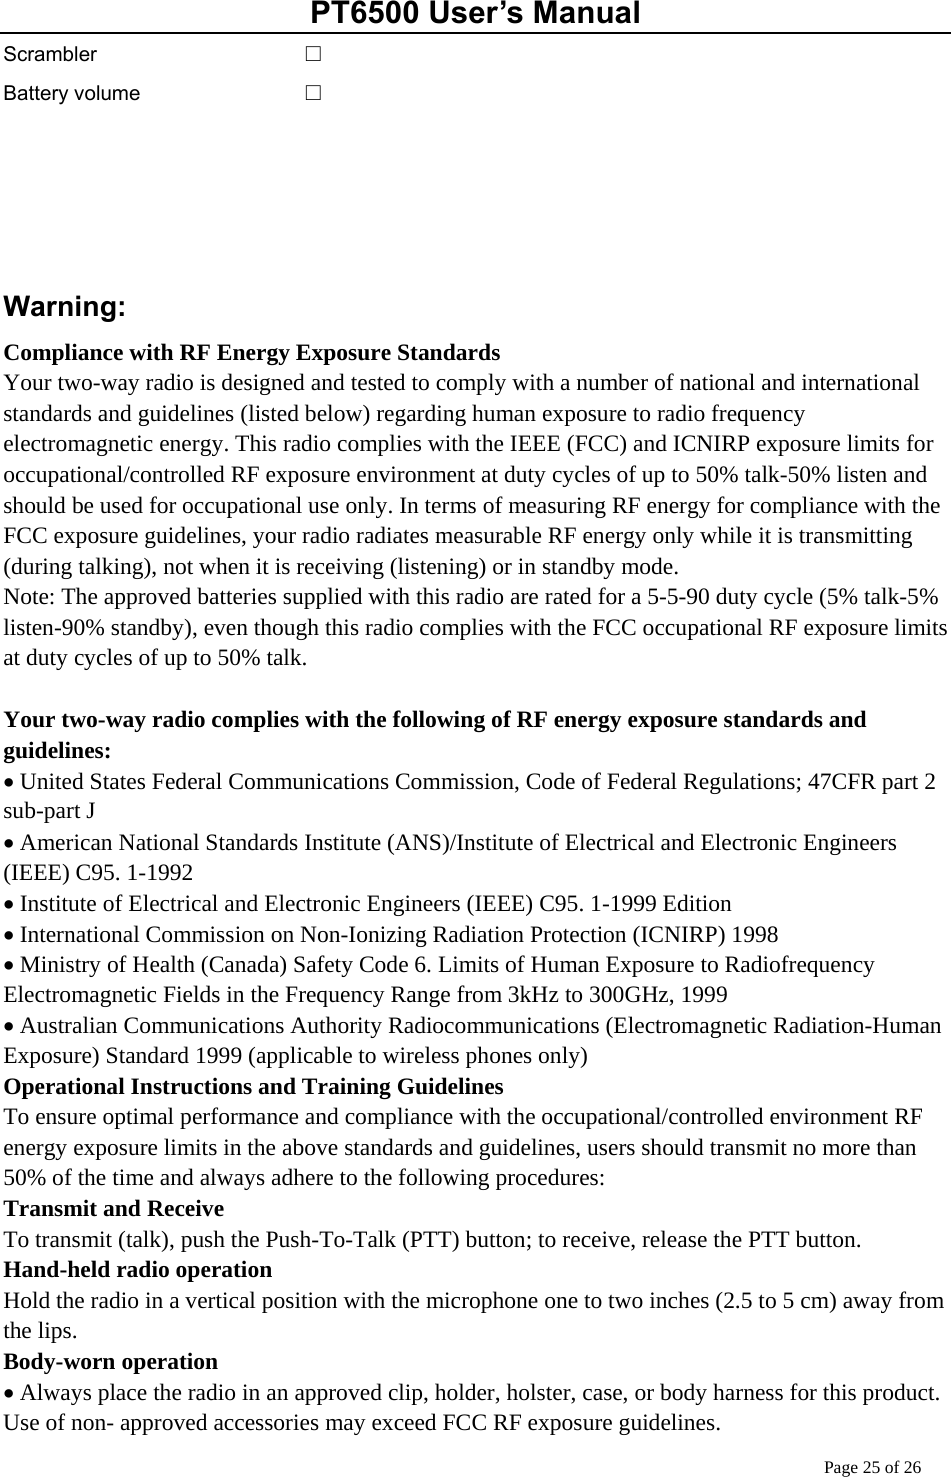 PT6500 User’s Manual Page 25 of 26 Scrambler Battery volume   □ □     Warning: Compliance with RF Energy Exposure Standards Your two-way radio is designed and tested to comply with a number of national and international standards and guidelines (listed below) regarding human exposure to radio frequency   electromagnetic energy. This radio complies with the IEEE (FCC) and ICNIRP exposure limits for occupational/controlled RF exposure environment at duty cycles of up to 50% talk-50% listen and should be used for occupational use only. In terms of measuring RF energy for compliance with the FCC exposure guidelines, your radio radiates measurable RF energy only while it is transmitting (during talking), not when it is receiving (listening) or in standby mode. Note: The approved batteries supplied with this radio are rated for a 5-5-90 duty cycle (5% talk-5% listen-90% standby), even though this radio complies with the FCC occupational RF exposure limits at duty cycles of up to 50% talk.  Your two-way radio complies with the following of RF energy exposure standards and guidelines: • United States Federal Communications Commission, Code of Federal Regulations; 47CFR part 2 sub-part J • American National Standards Institute (ANS)/Institute of Electrical and Electronic Engineers (IEEE) C95. 1-1992 • Institute of Electrical and Electronic Engineers (IEEE) C95. 1-1999 Edition • International Commission on Non-Ionizing Radiation Protection (ICNIRP) 1998 • Ministry of Health (Canada) Safety Code 6. Limits of Human Exposure to Radiofrequency Electromagnetic Fields in the Frequency Range from 3kHz to 300GHz, 1999   • Australian Communications Authority Radiocommunications (Electromagnetic Radiation-Human Exposure) Standard 1999 (applicable to wireless phones only) Operational Instructions and Training Guidelines To ensure optimal performance and compliance with the occupational/controlled environment RF energy exposure limits in the above standards and guidelines, users should transmit no more than 50% of the time and always adhere to the following procedures: Transmit and Receive To transmit (talk), push the Push-To-Talk (PTT) button; to receive, release the PTT button. Hand-held radio operation Hold the radio in a vertical position with the microphone one to two inches (2.5 to 5 cm) away from the lips. Body-worn operation • Always place the radio in an approved clip, holder, holster, case, or body harness for this product. Use of non- approved accessories may exceed FCC RF exposure guidelines. 